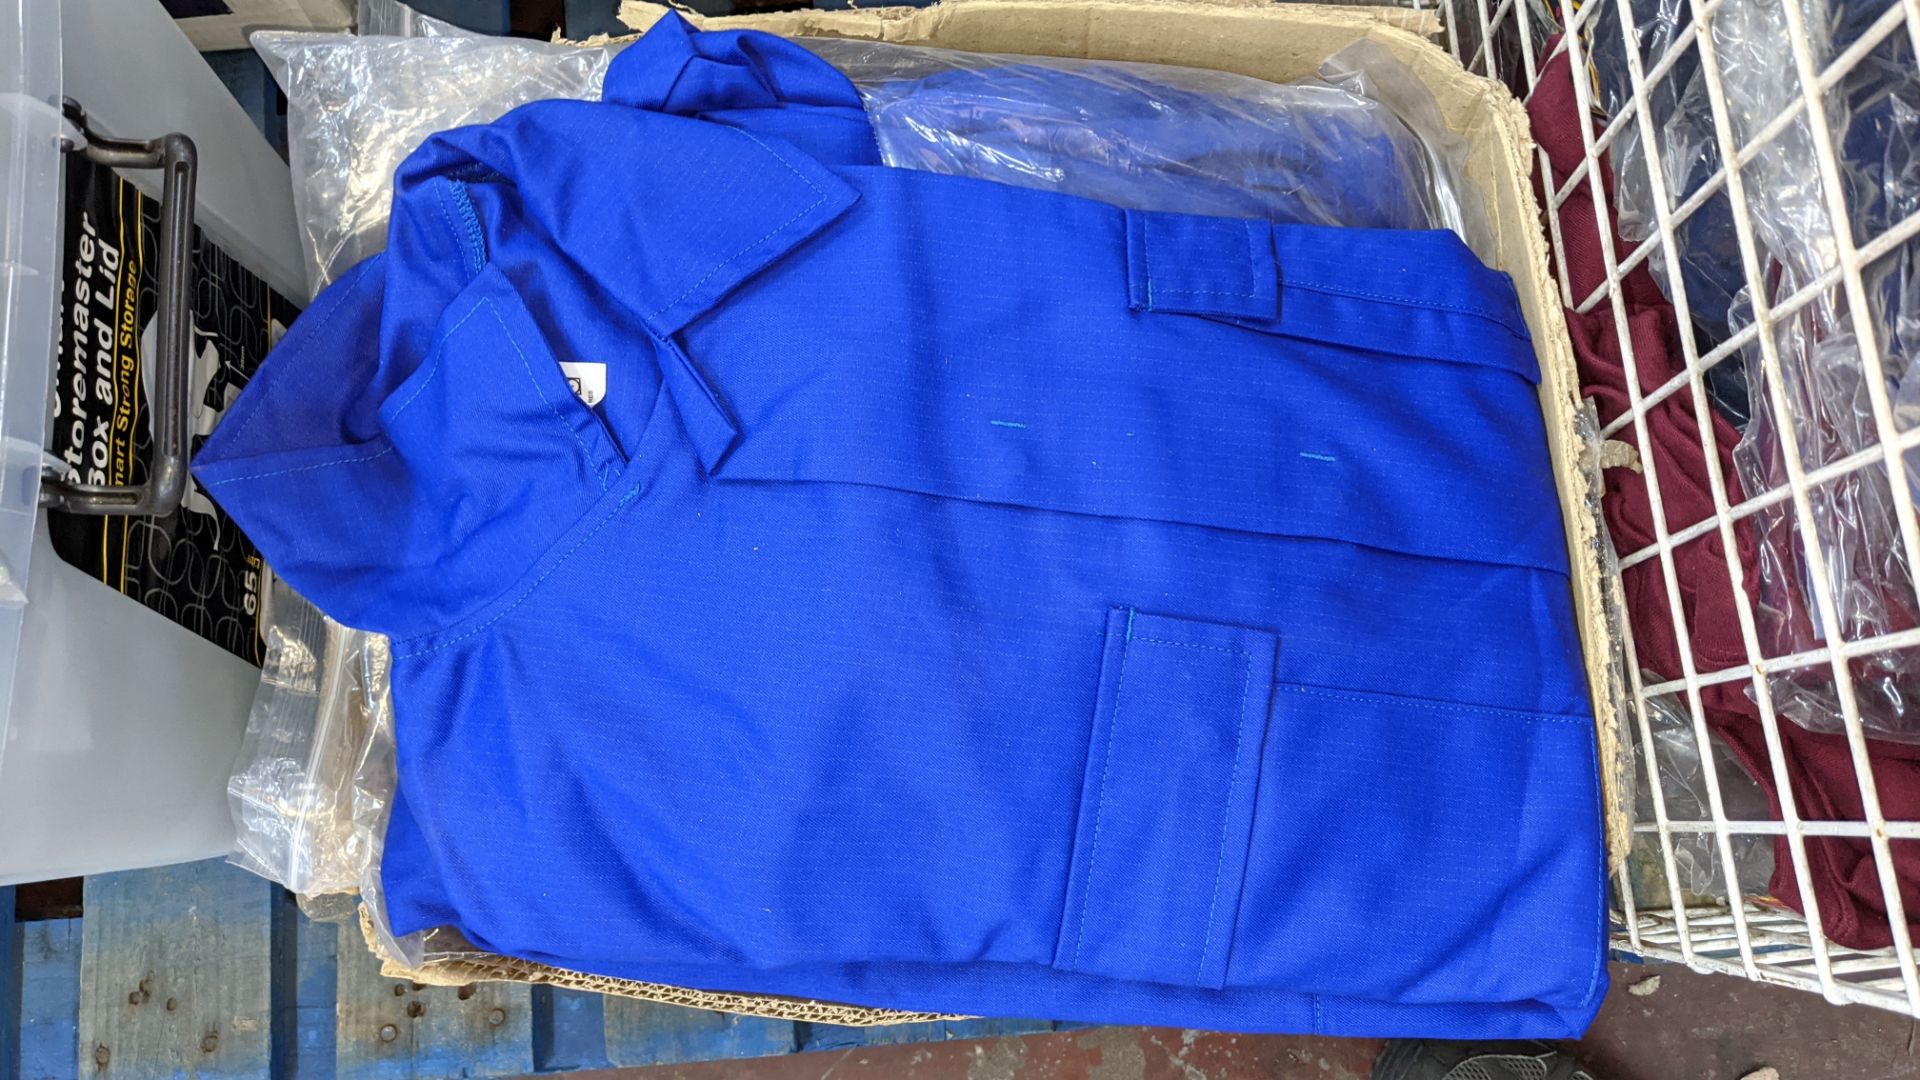 Approx 14 off blue heavy weight trousers - 1 box - Image 3 of 5